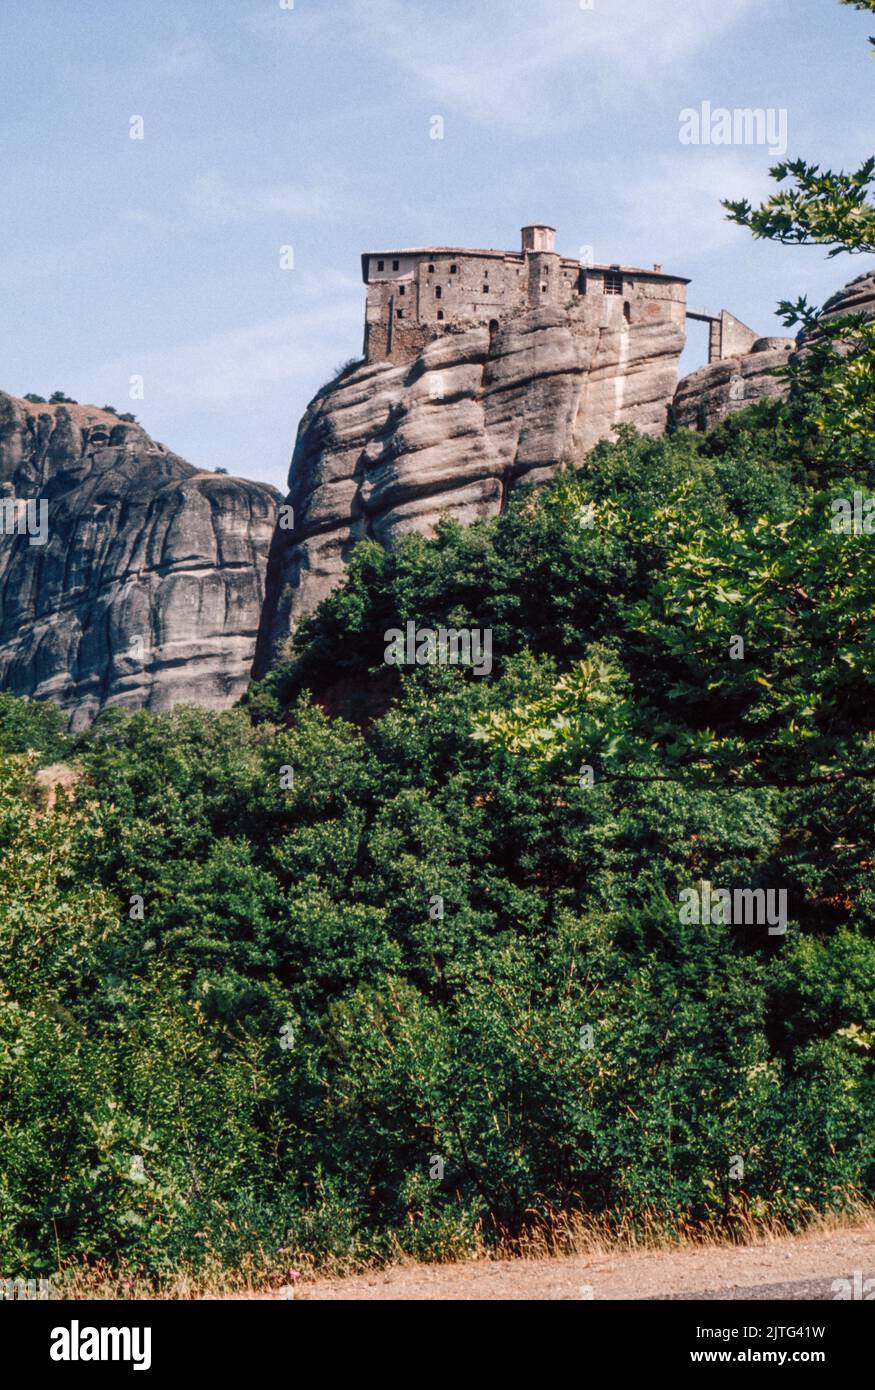 Monastery of Rousanou at The Meteora - a rock formation in central Greece hosting one of the largest and most precipitously built complexes of Eastern Orthodox monasteries. March 1980. Archival scan from a slide. Stock Photo